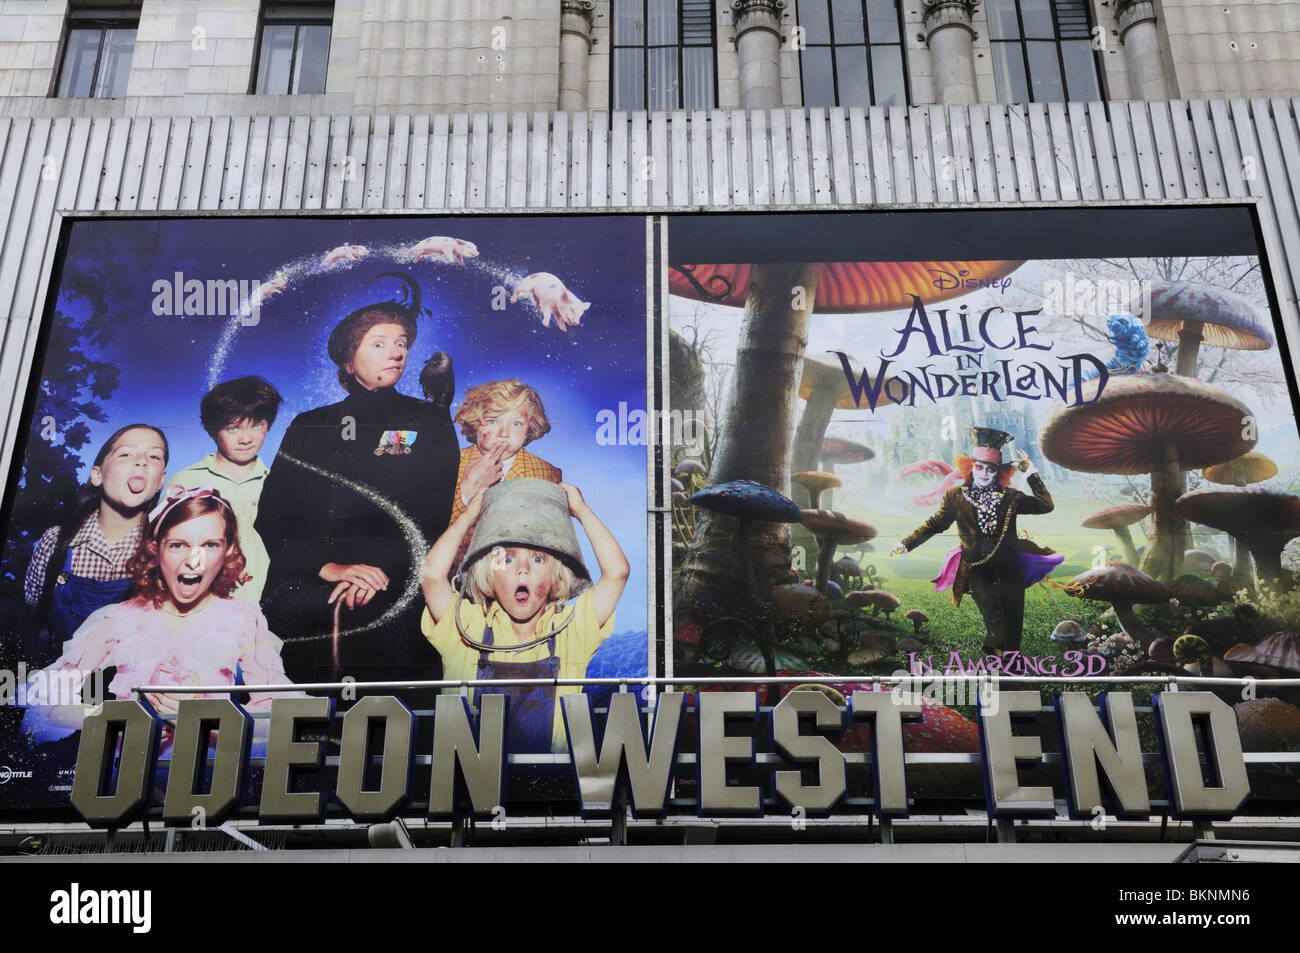 Odeon West End cinema sign with Alice in Wonderland Billboard, Leicester Square, London, England, UK Stock Photo